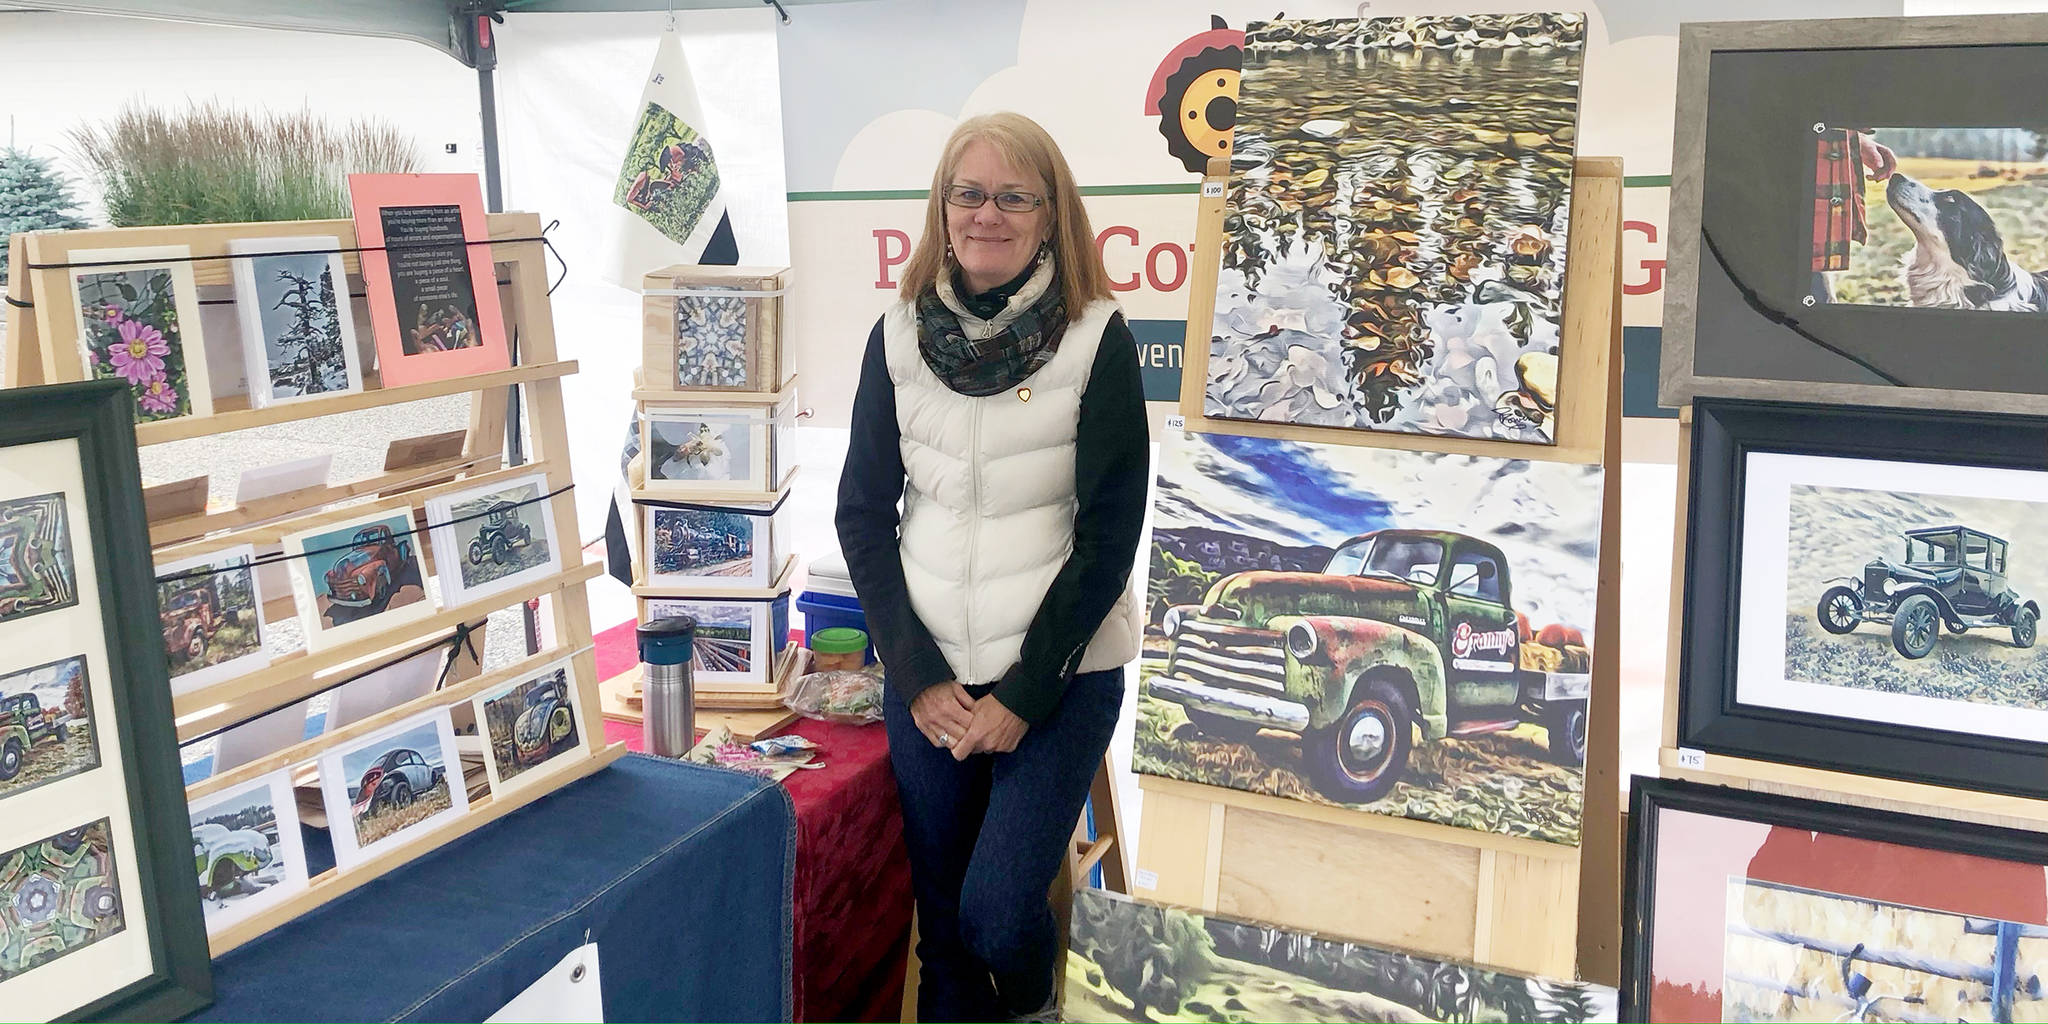 Paula Cowen shows some of her artwork at the Summerland Sunday Farmers and Crafters Market. The market opened on June 28 at the Summerland Arena parking lot. (John Arendt - Summerland Review)